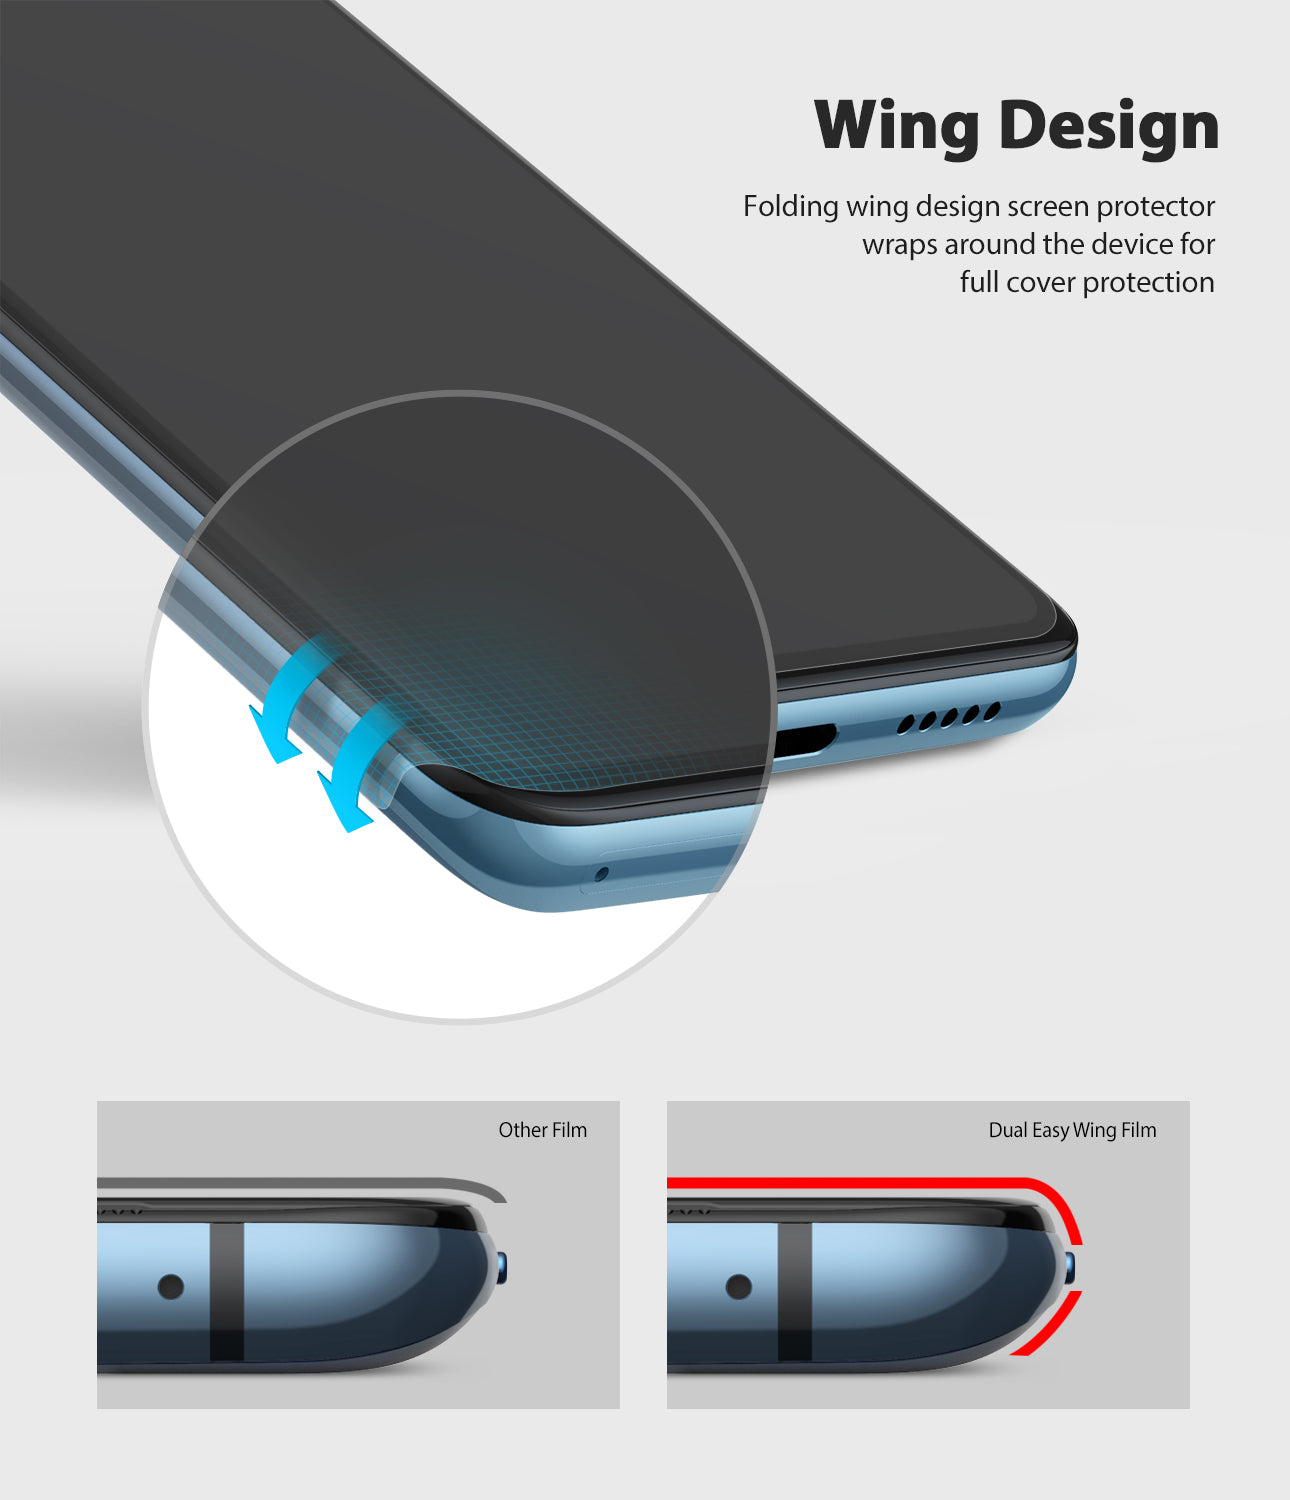 folding wing design screen protector wraps around the device for full cover coverage